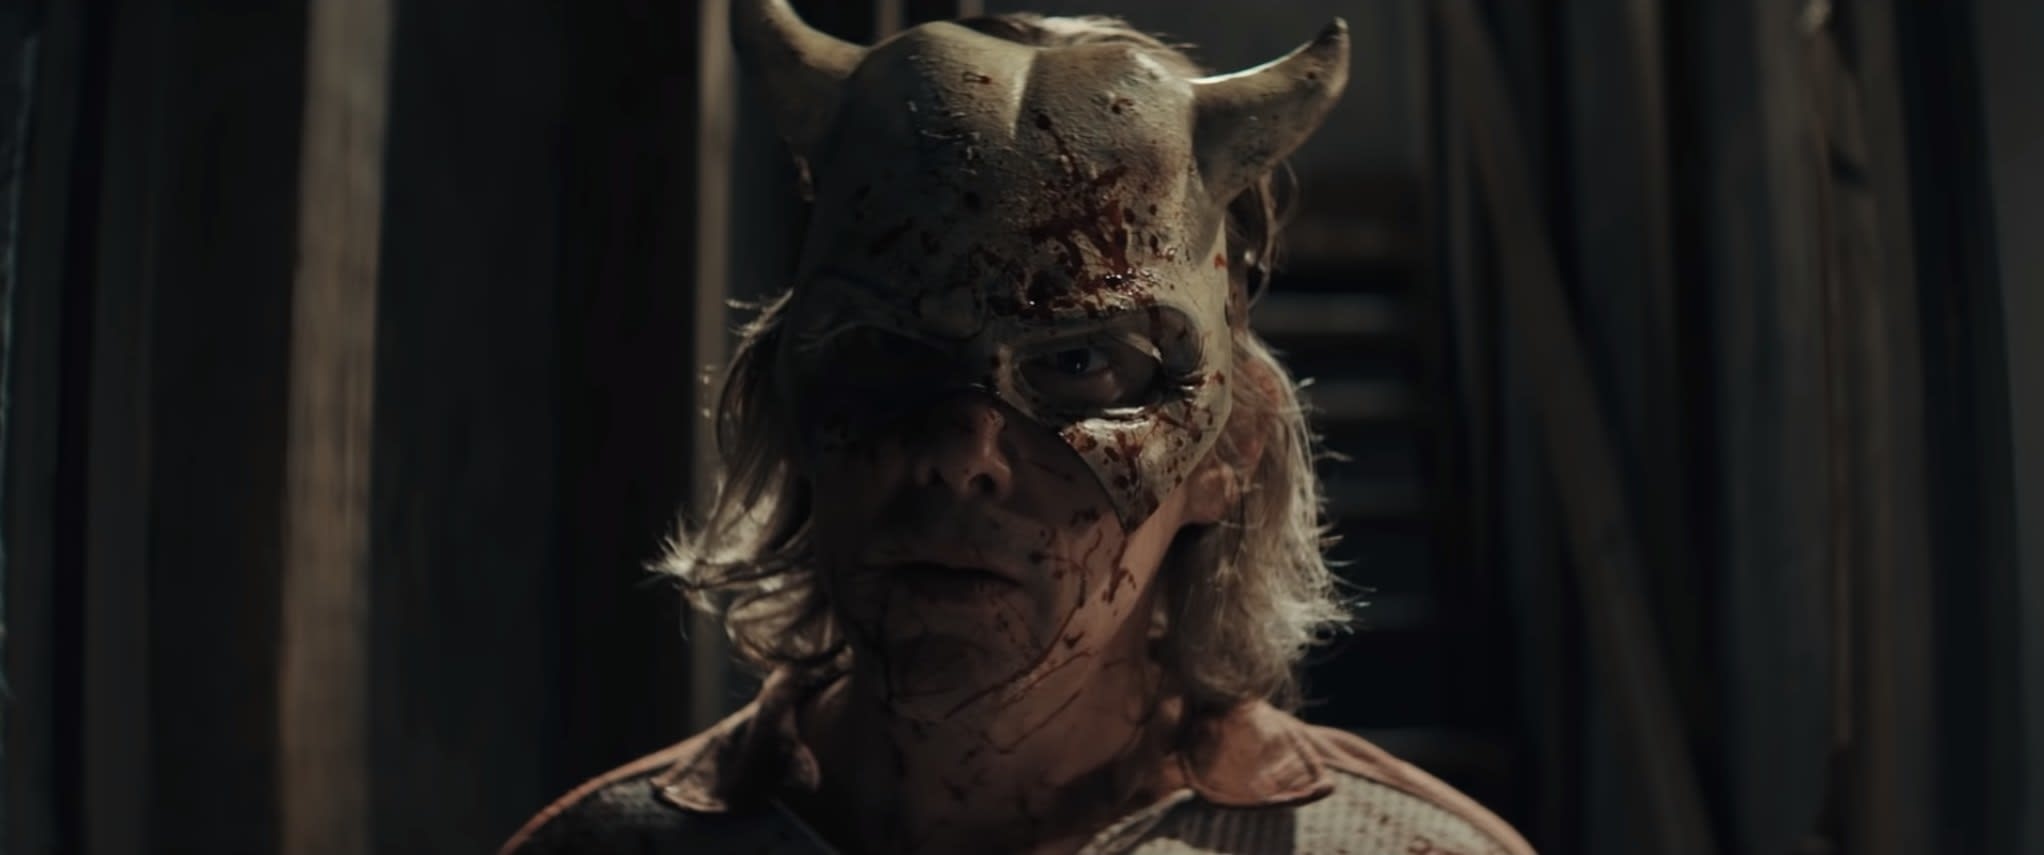 Ethan Hawke in a bloody broken mask with horns in The Black Phone